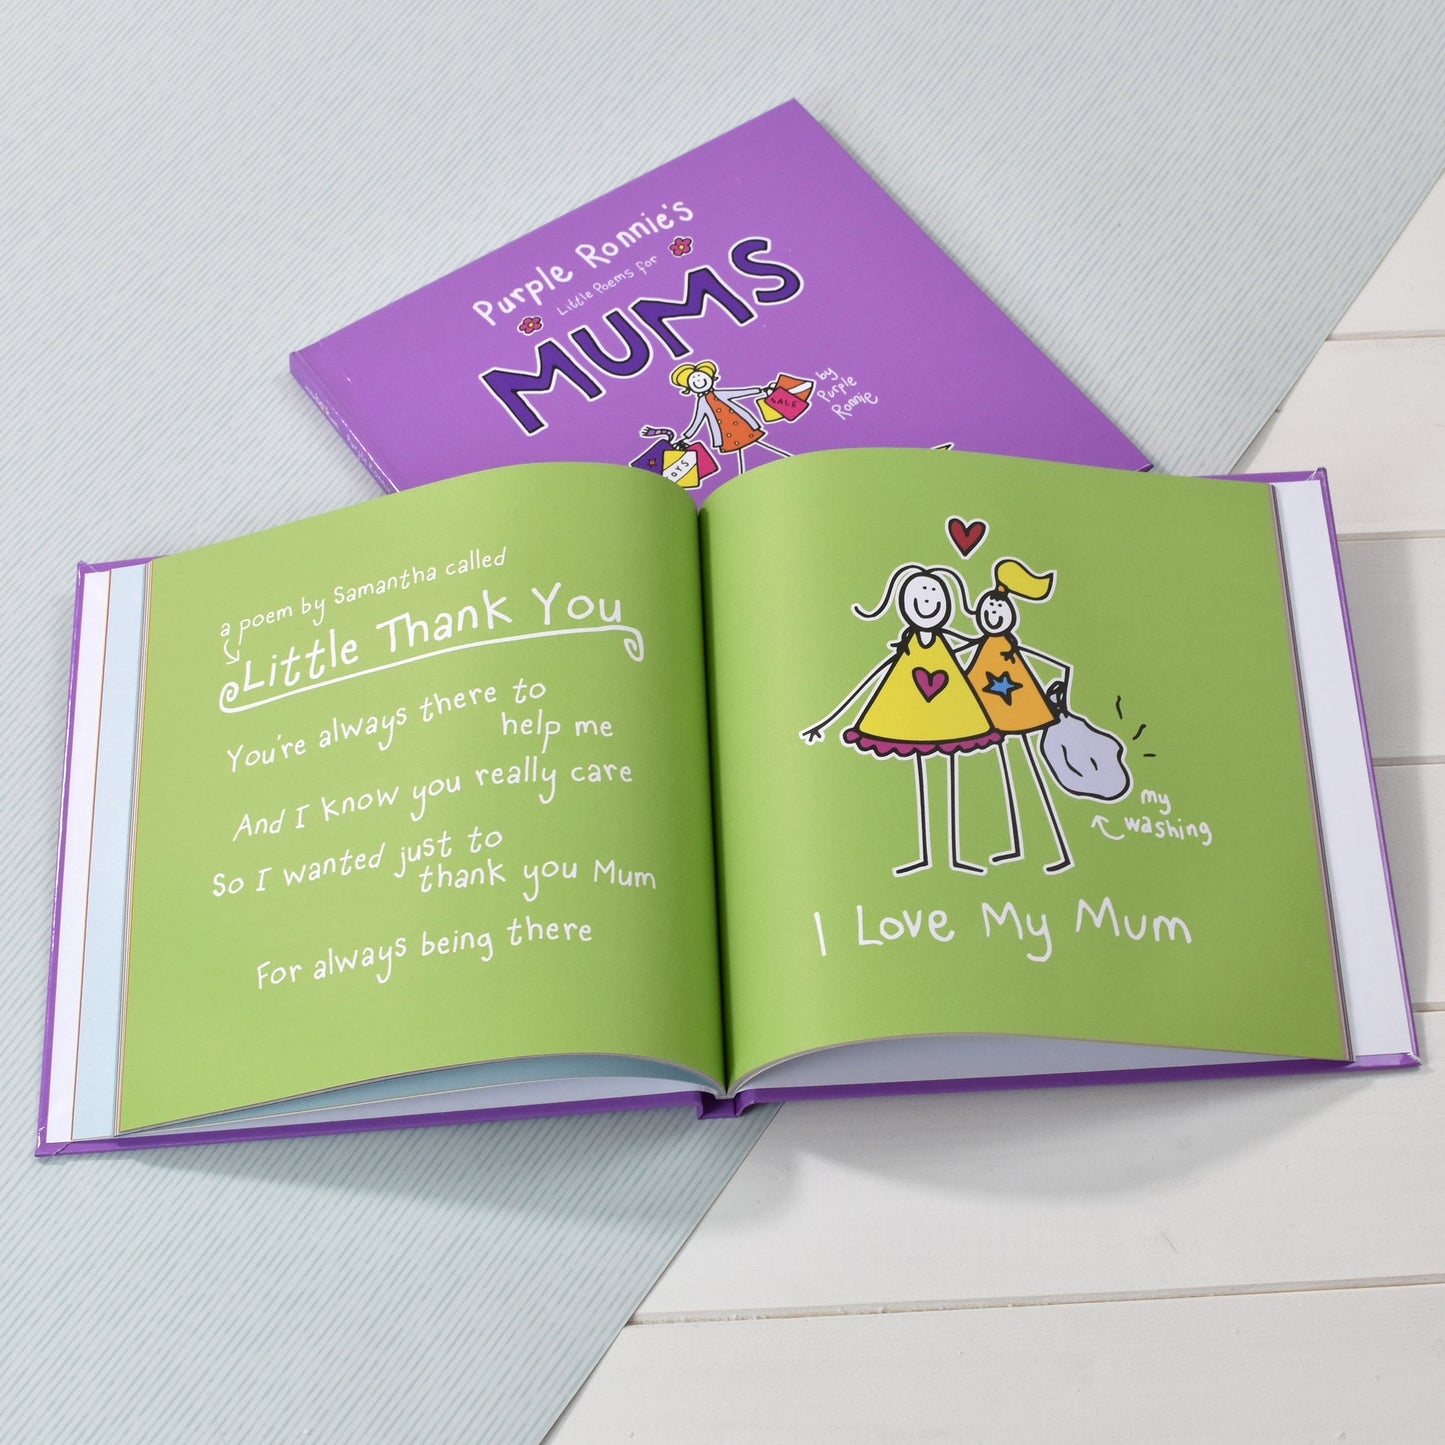 Personalised Purple Ronnie's Little Poems for Mums Book